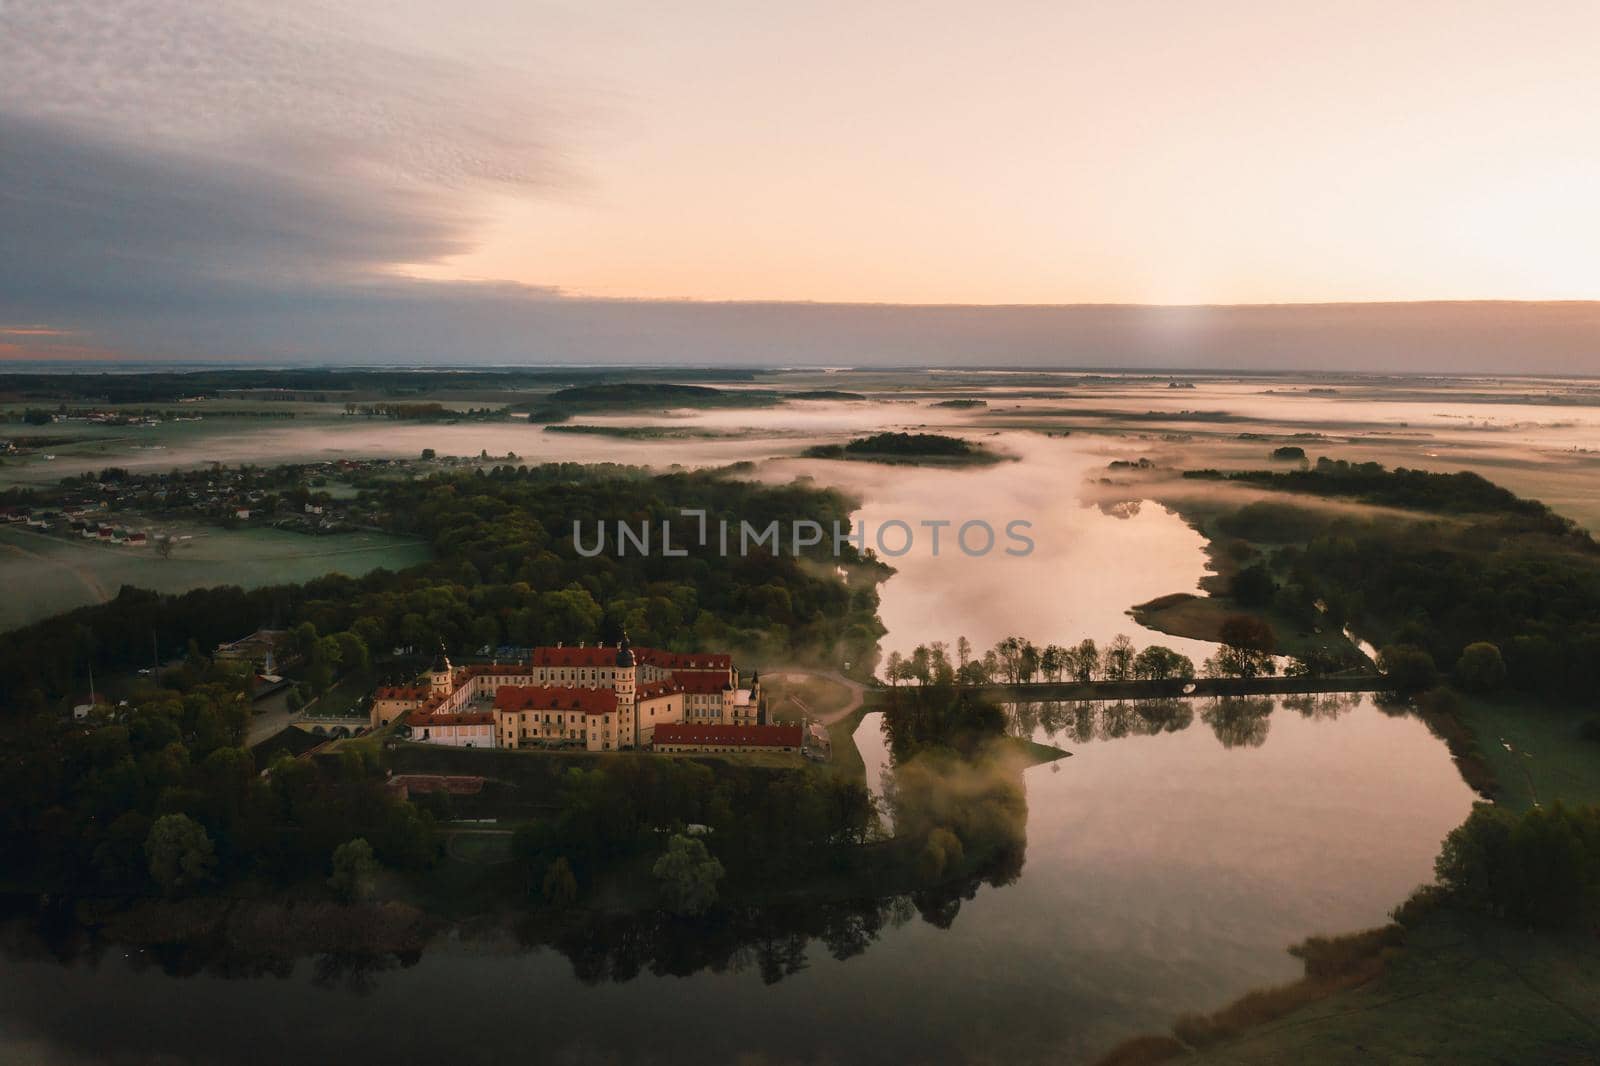 Nesvizh castle is a residential castle of the Radziwill family in Nesvizh, Belarus, with a beautiful view from above at dawn by Lobachad